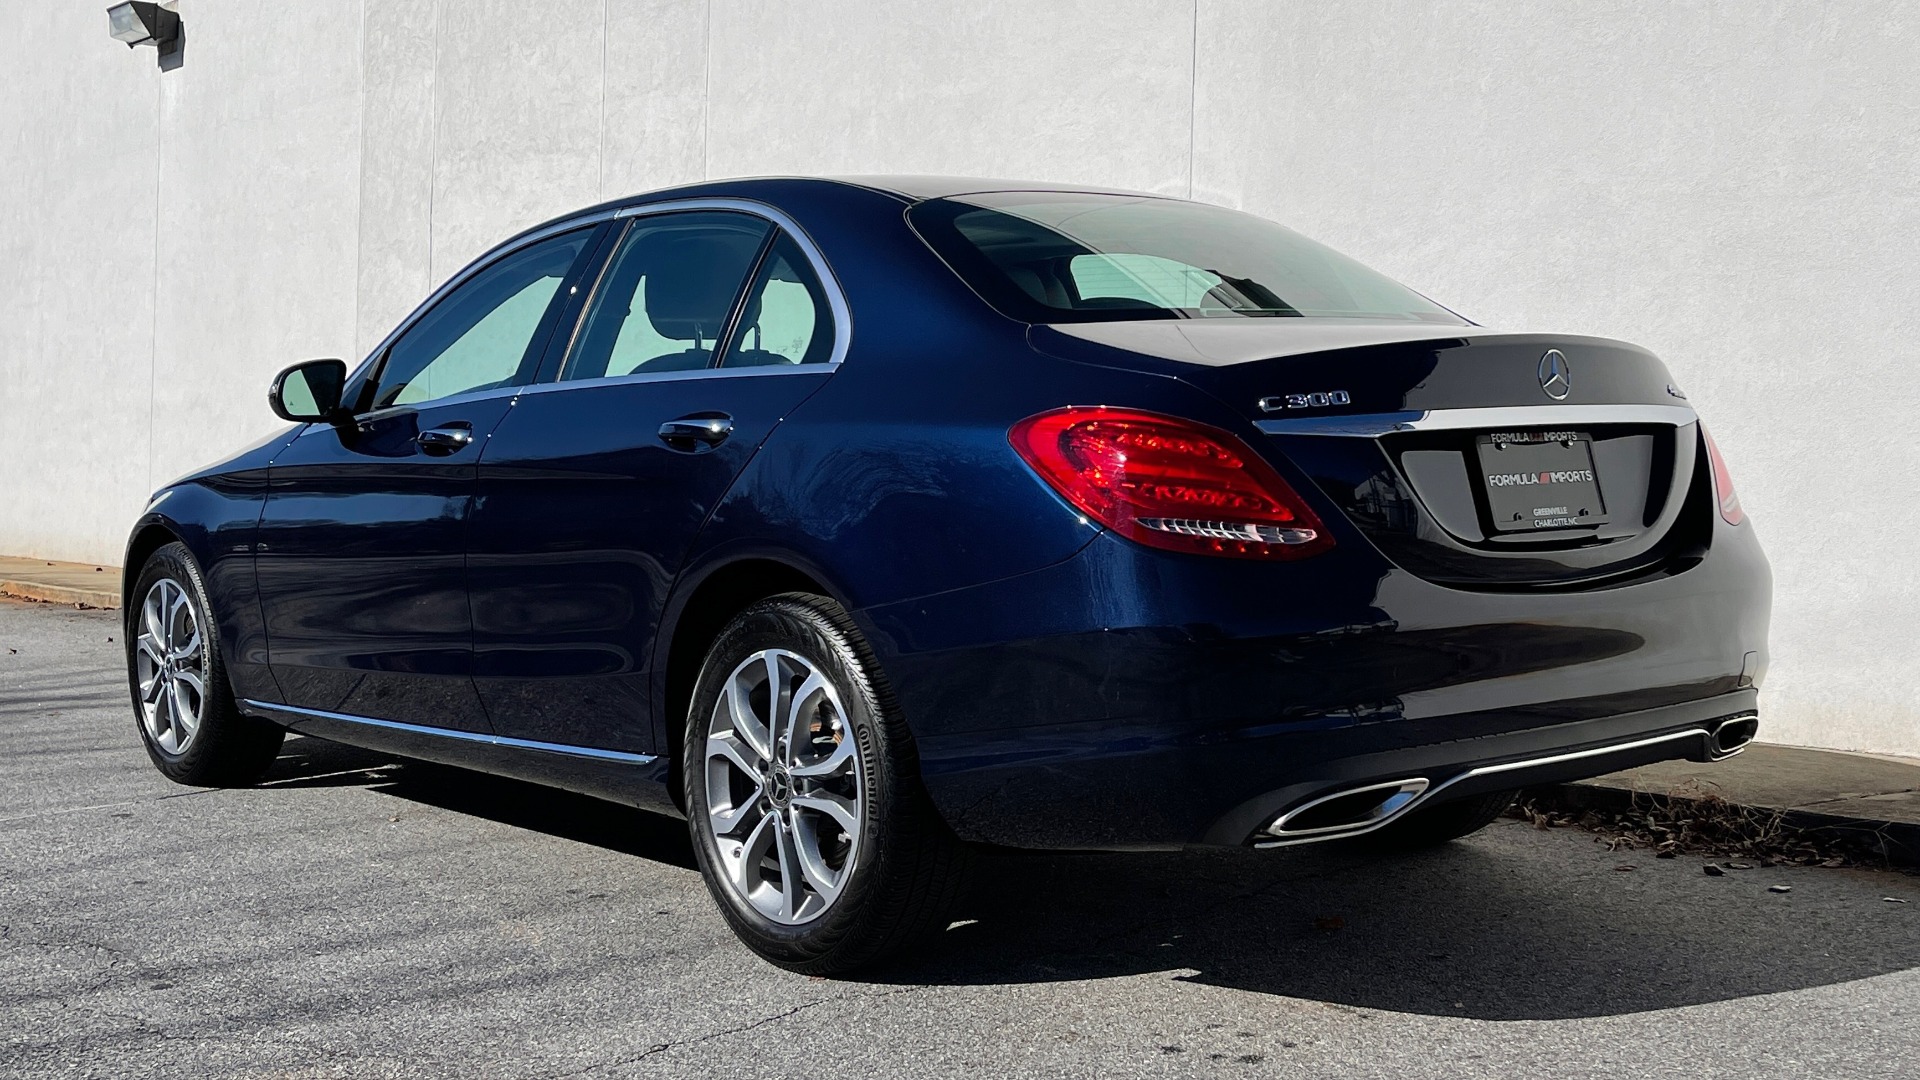 Used 2018 Mercedes-Benz C-CLASS C 300 4MATIC PREMIUM / APPLE / PANO-ROOF / REARVIEW for sale $35,795 at Formula Imports in Charlotte NC 28227 3